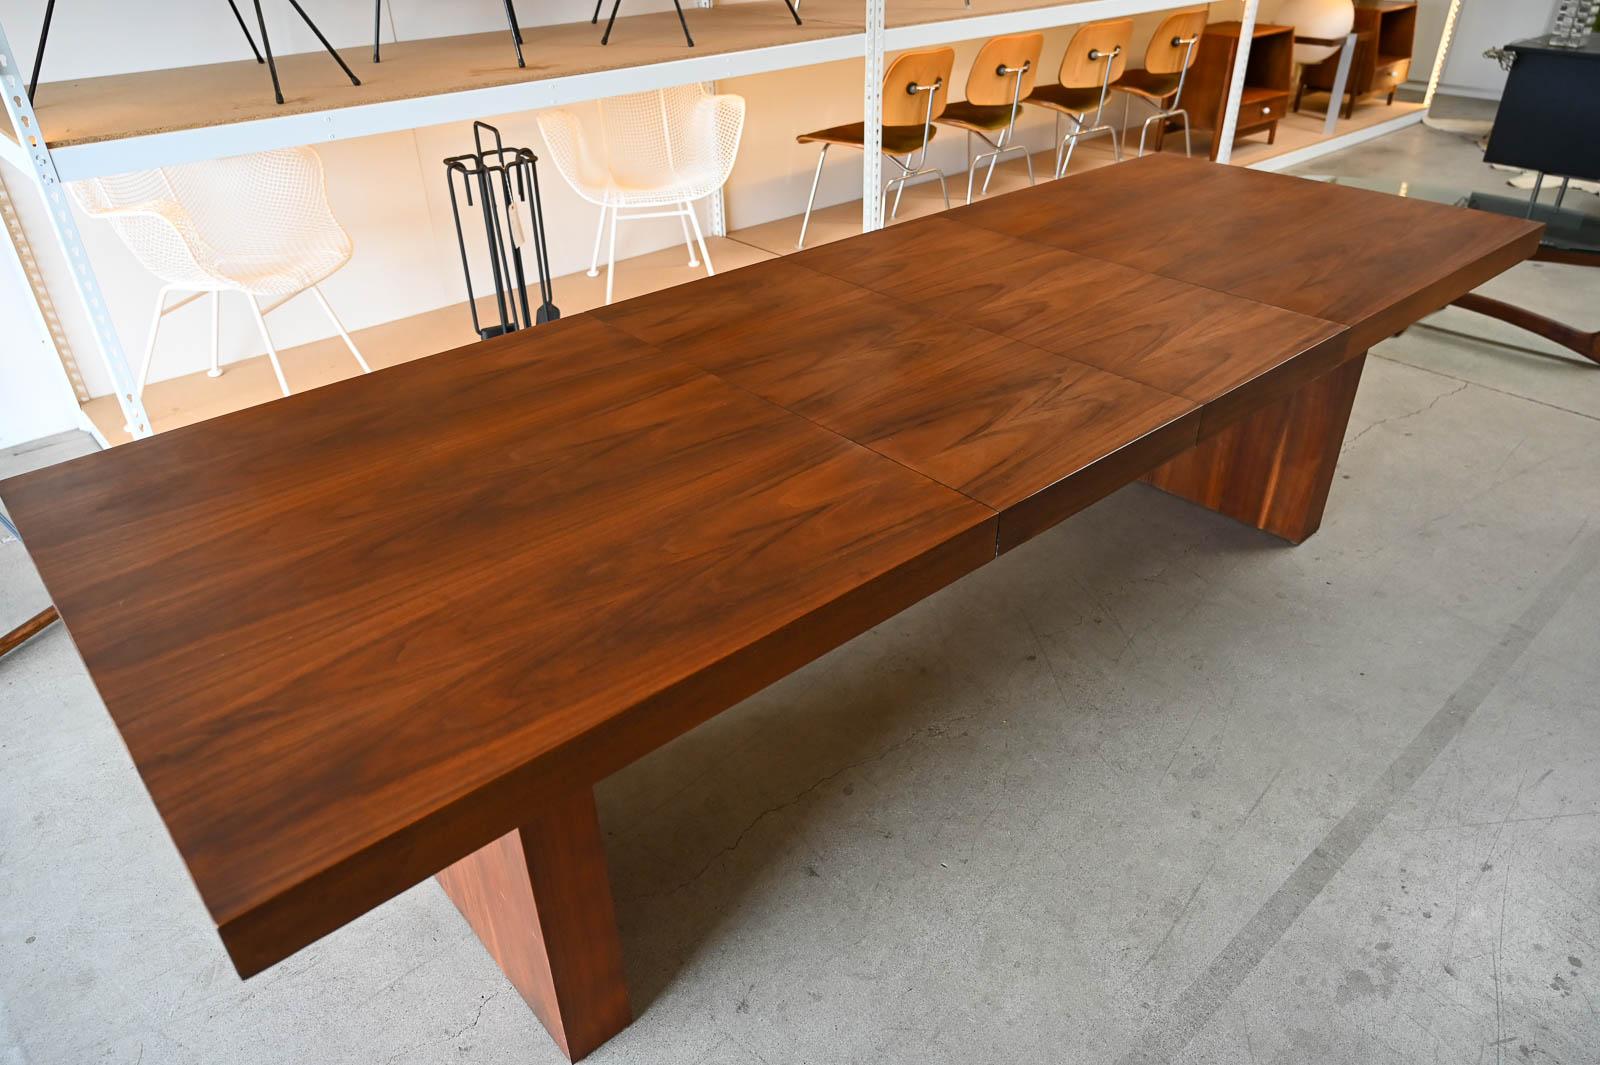 American Walnut Dining Table by Merton Gershun for Dillingham Esprit Collection, ca. 1970